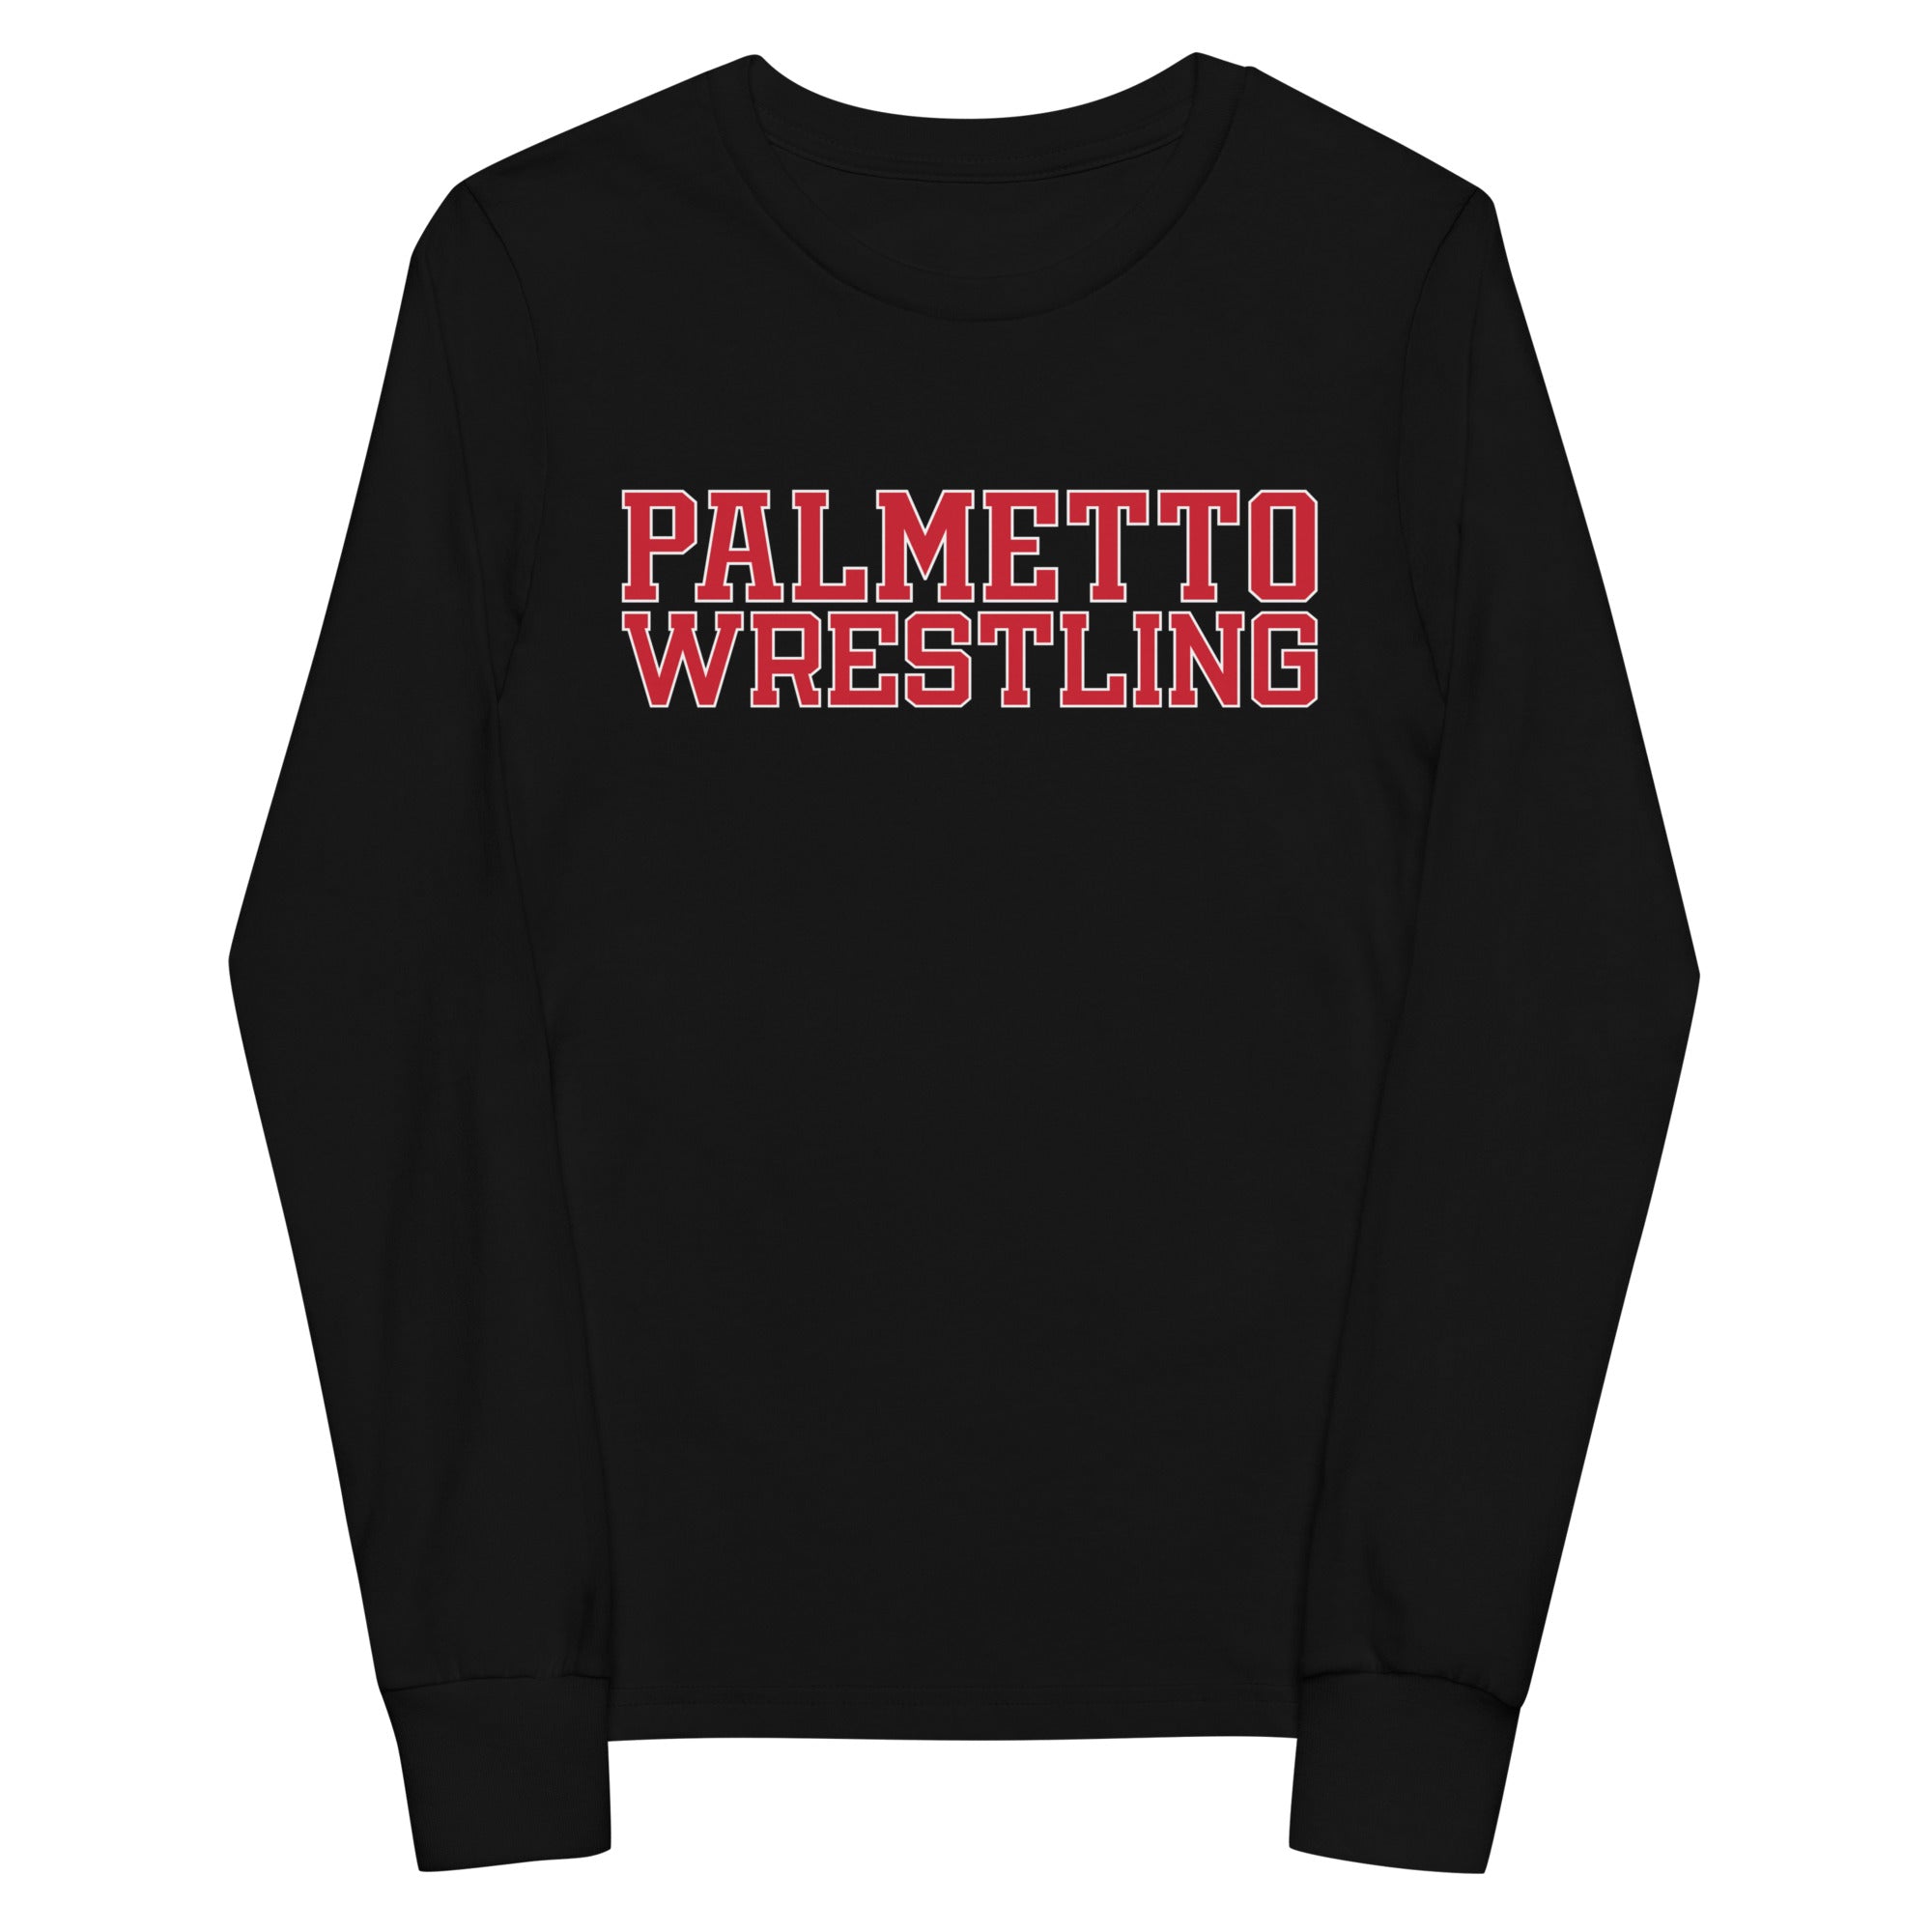 Palmetto Wrestling  Stripes Youth Long Sleeve Tee